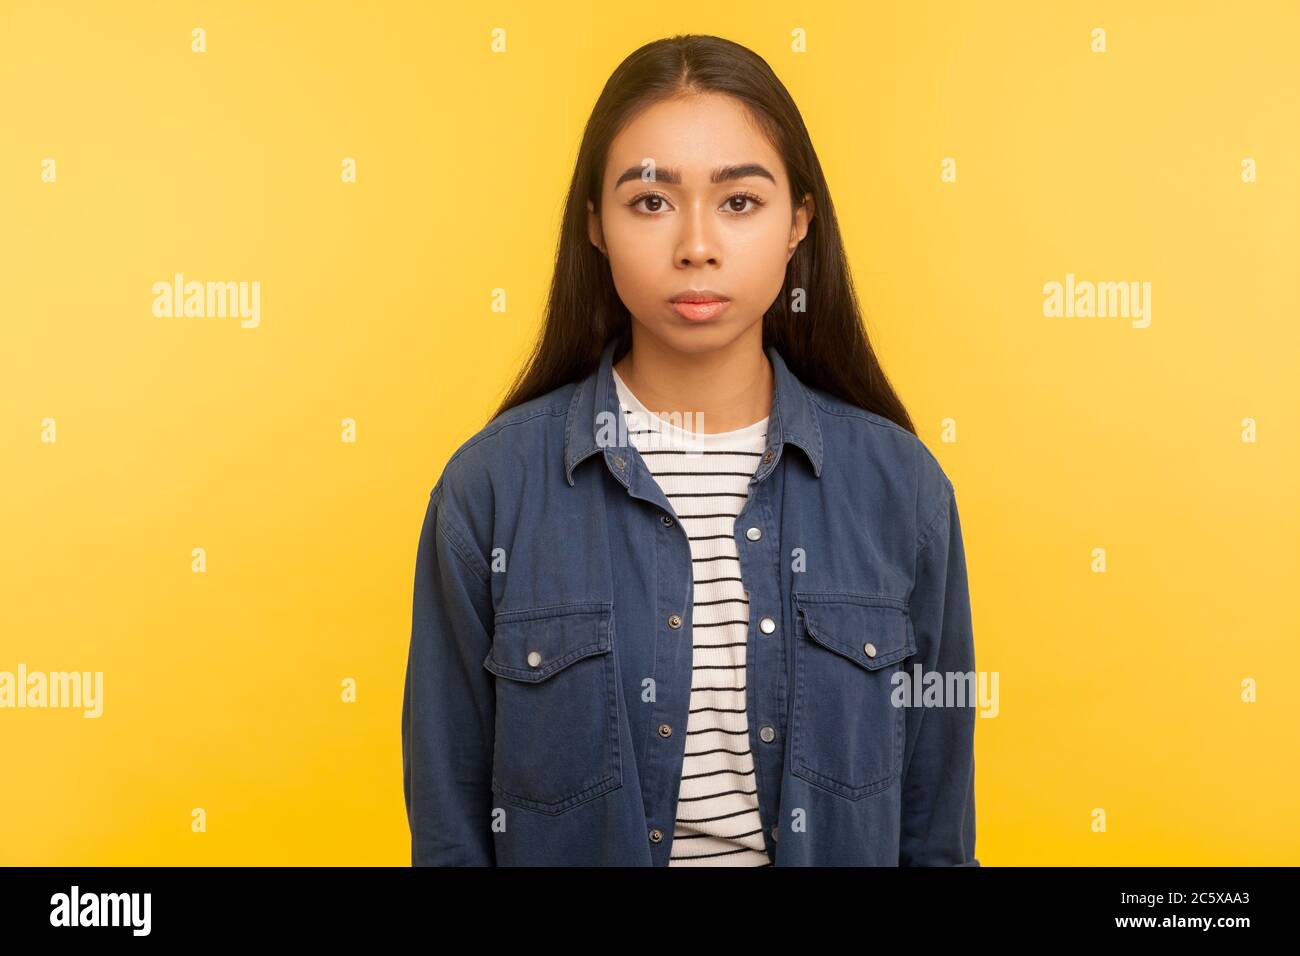 Portrait of serious unsmiling brunette girl in denim shirt standing calm, looking focused concentrated at camera, earnest attentive expression. indoor Stock Photo